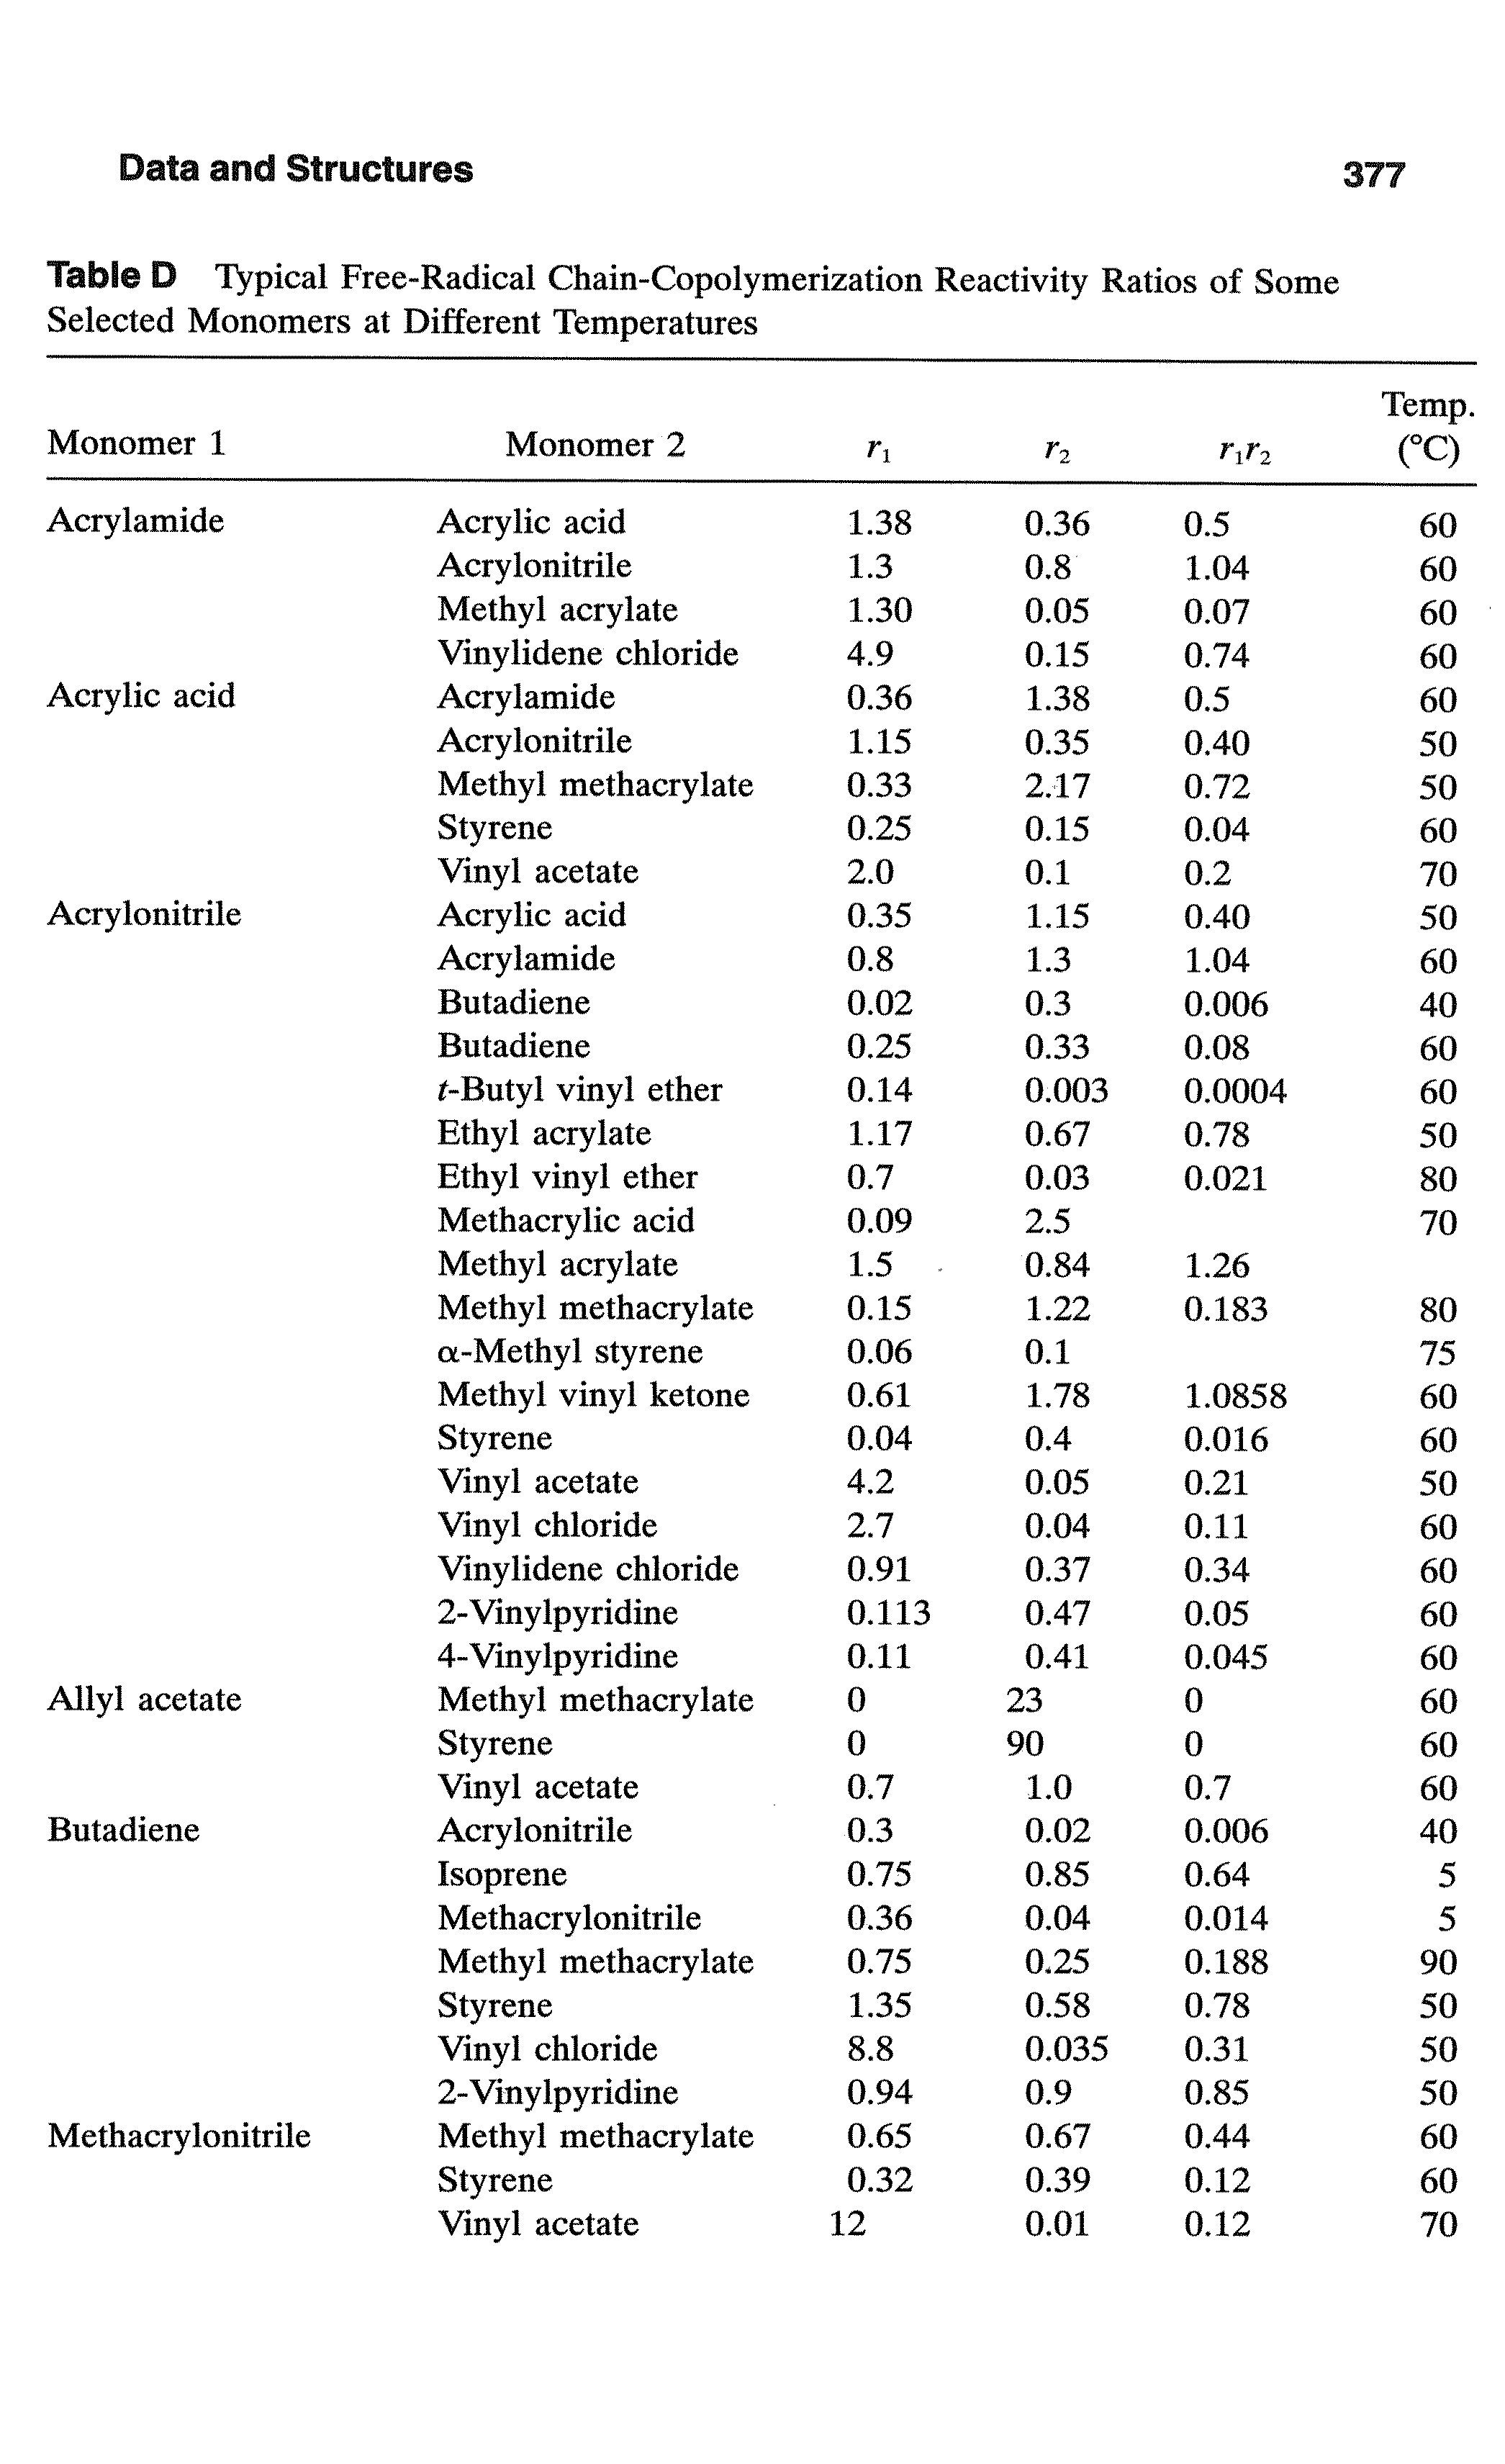 Table D Typical Free-Radical Chain-Copolymerization Reactivity Ratios of Some Selected Monomers at Different Temperatures...